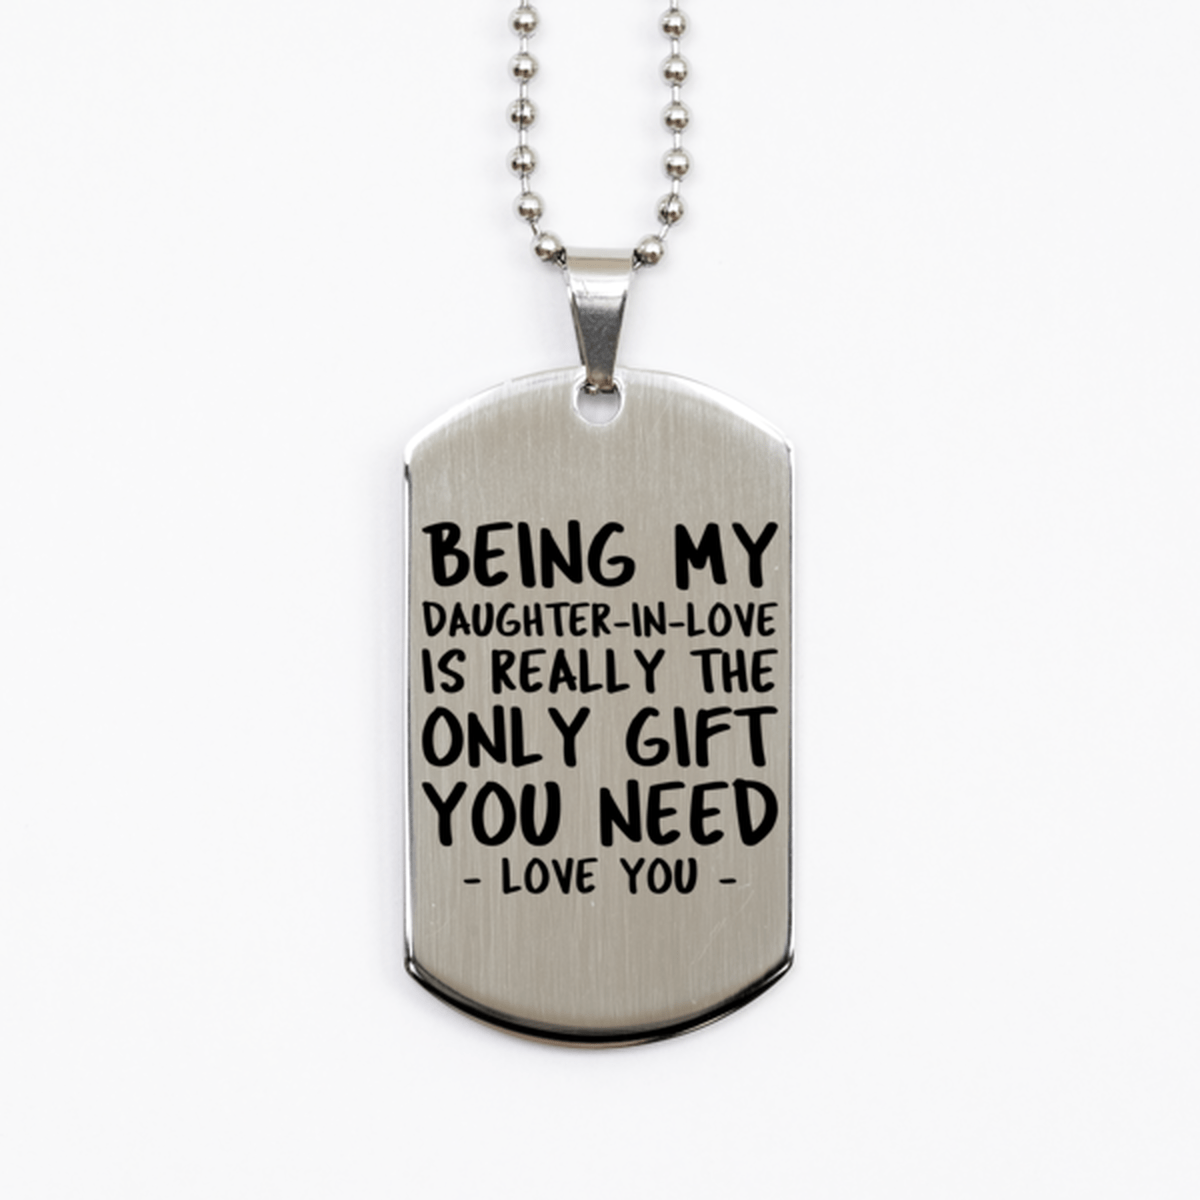 Funny Daughter-in-love Silver Dog Tag Necklace, Being My Daughter-in-love Is Really the Only Gift You Need, Best Birthday Gifts for Daughter-in-love